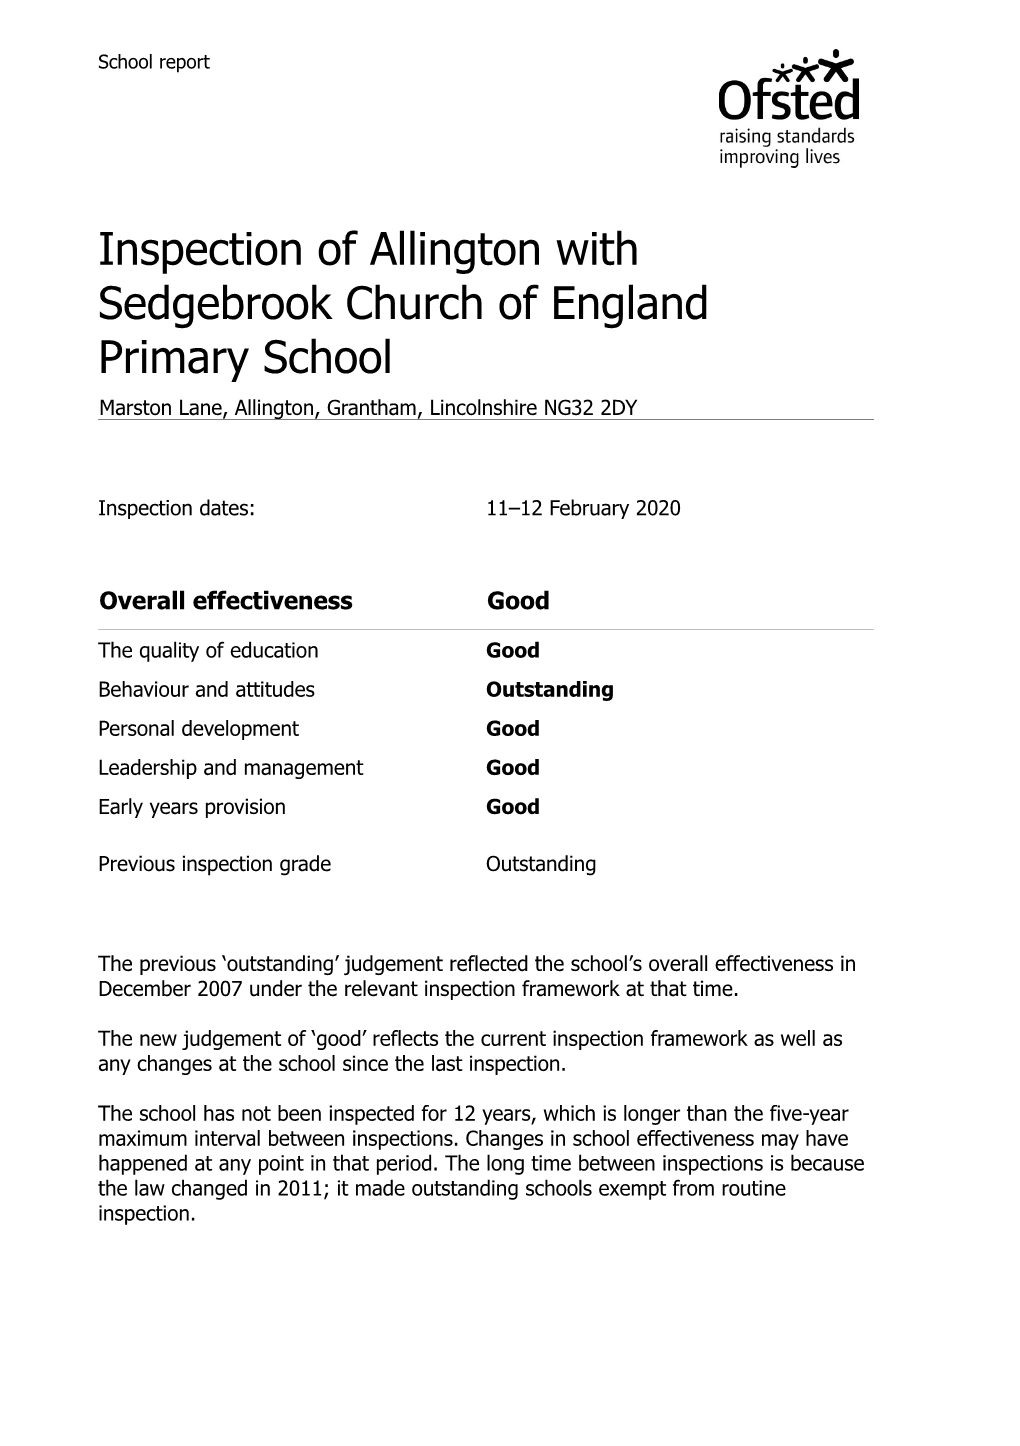 Inspection of Allington with Sedgebrook Church of England Primary School Marston Lane, Allington, Grantham, Lincolnshire NG32 2DY